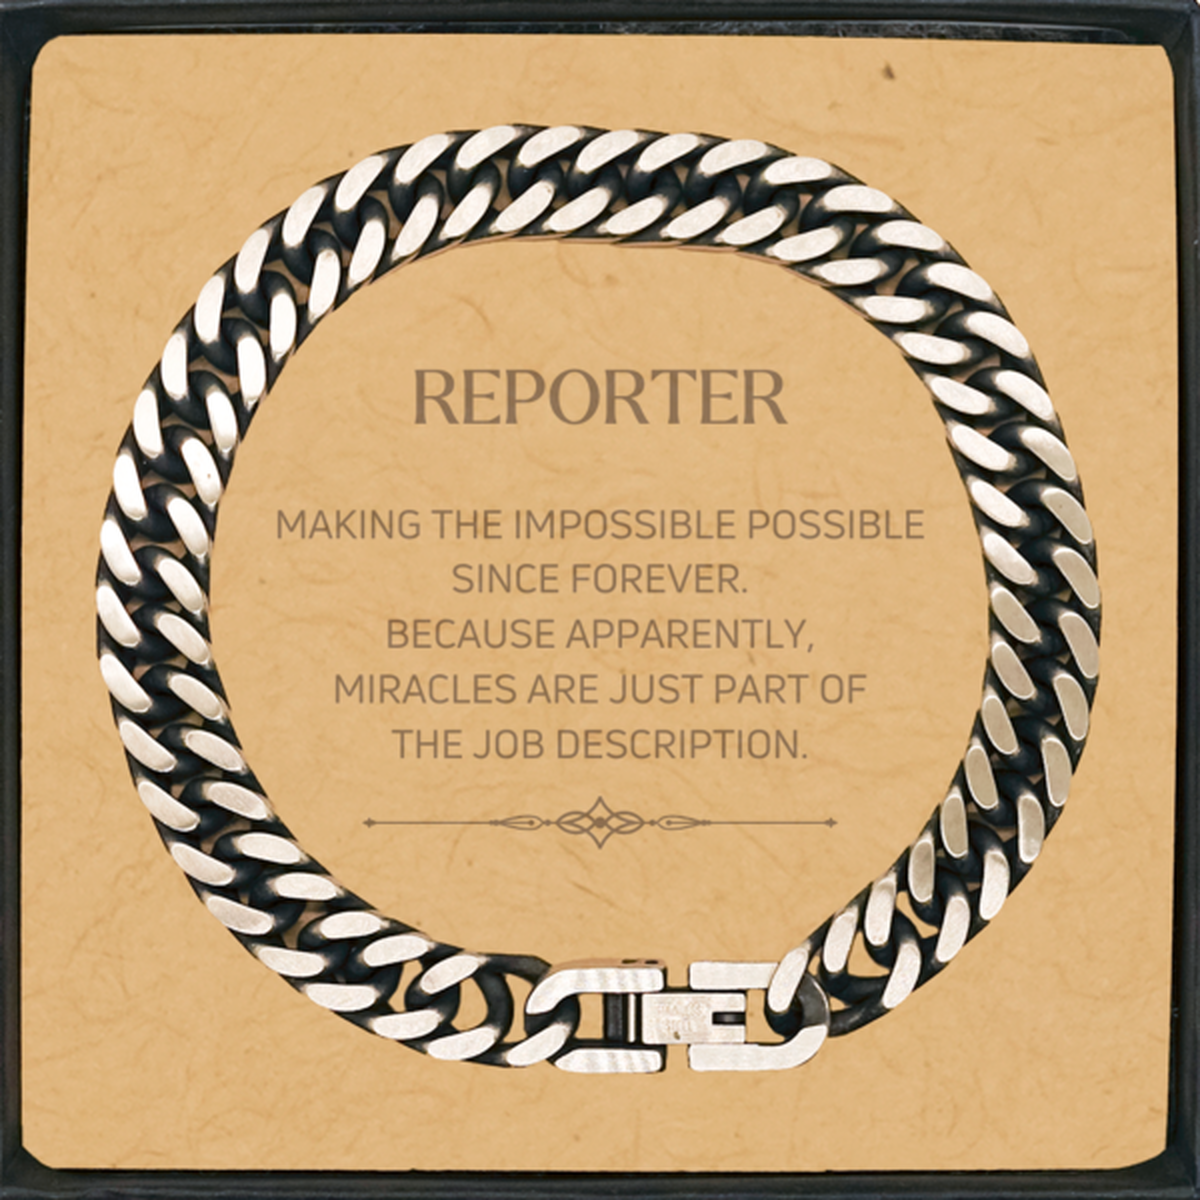 Funny Reporter Gifts, Miracles are just part of the job description, Inspirational Birthday Cuban Link Chain Bracelet For Reporter, Men, Women, Coworkers, Friends, Boss